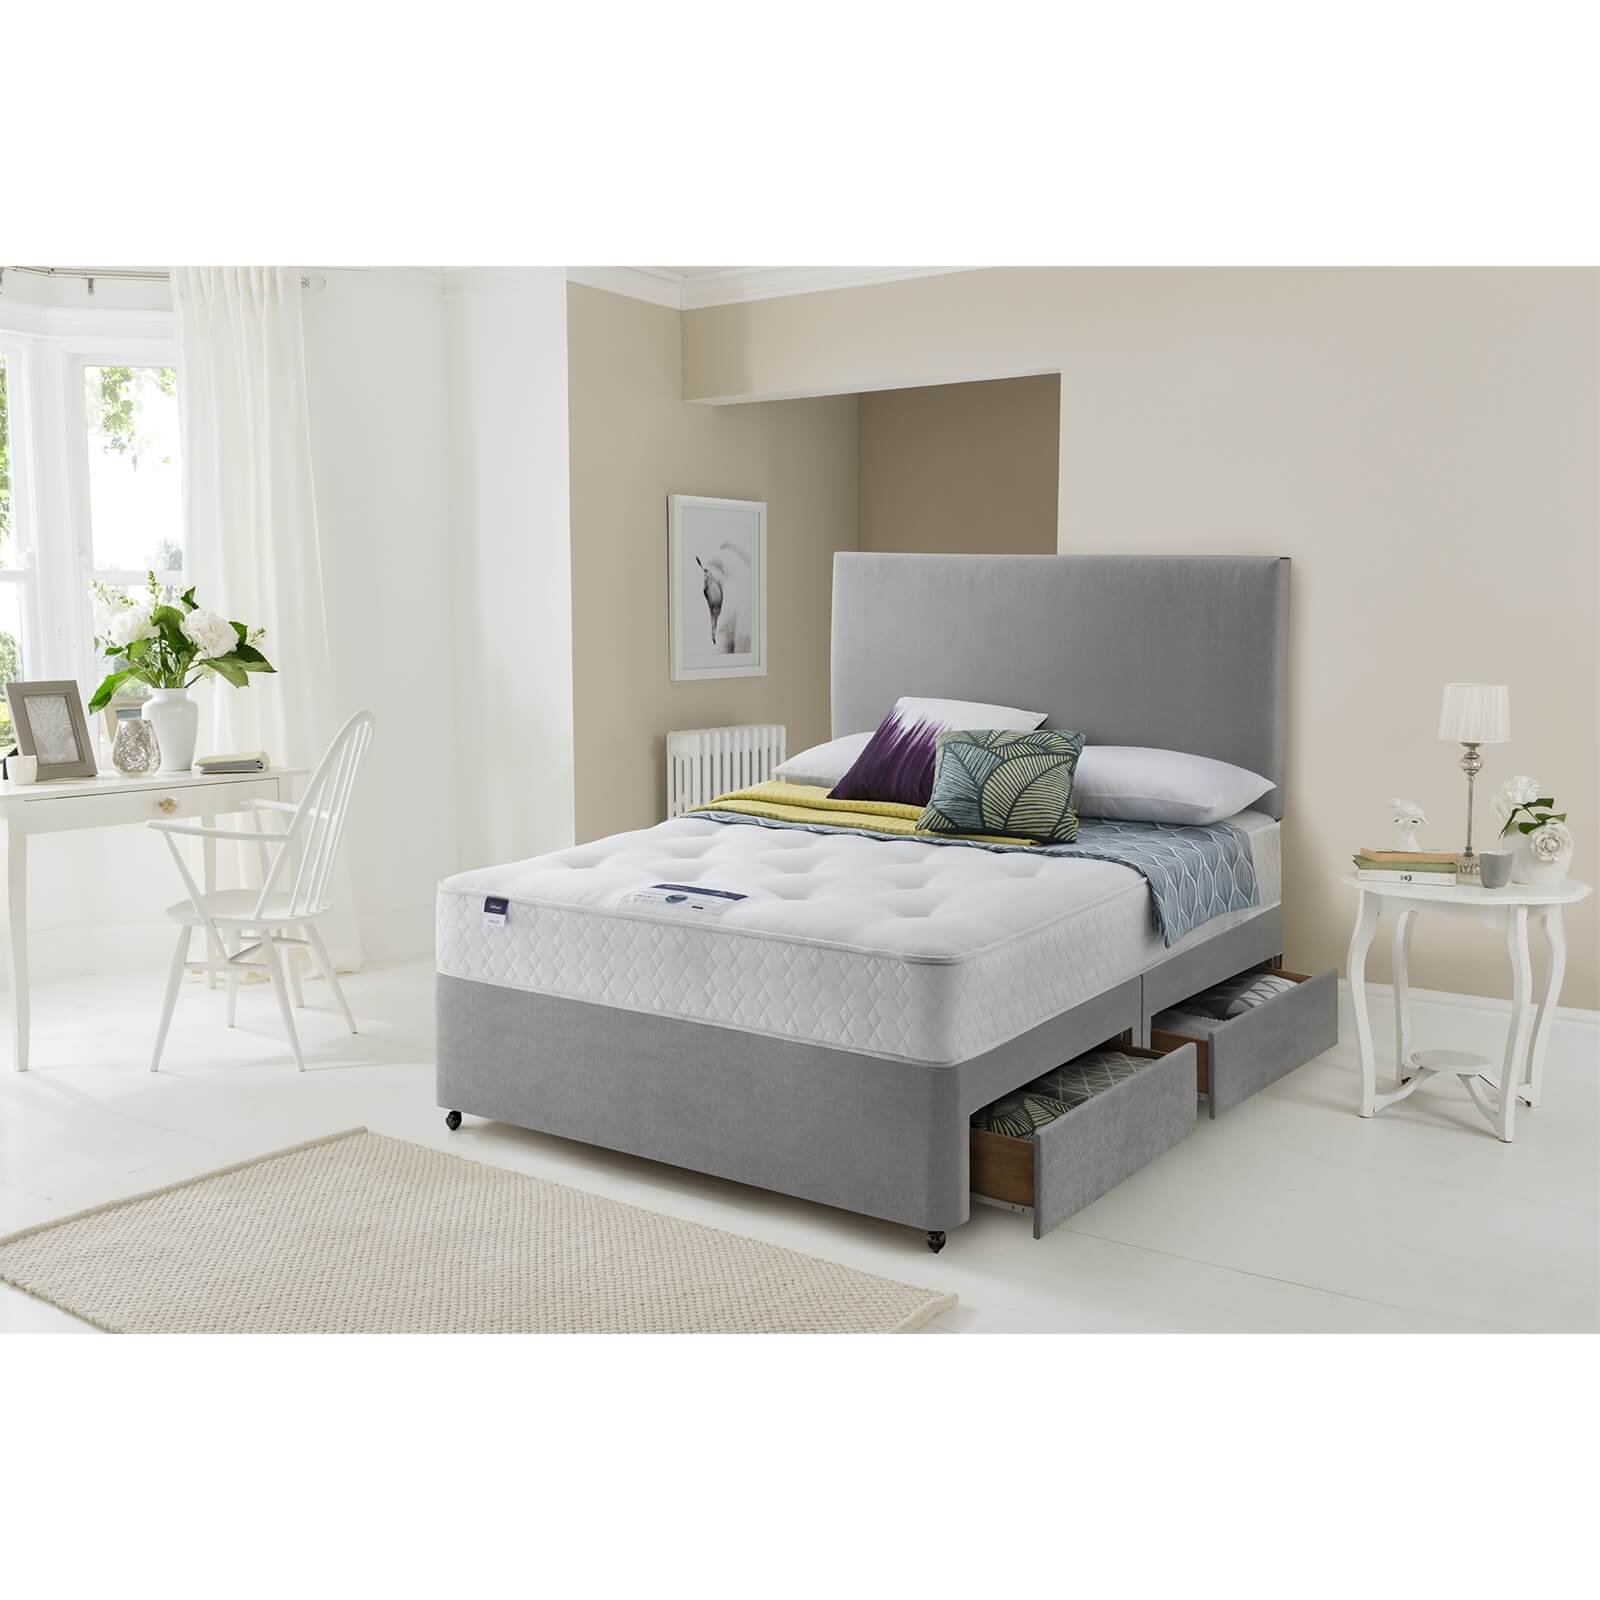 Silentnight Miracoil Ortho Divan Bed 2 Drawer - Slate Grey - Double